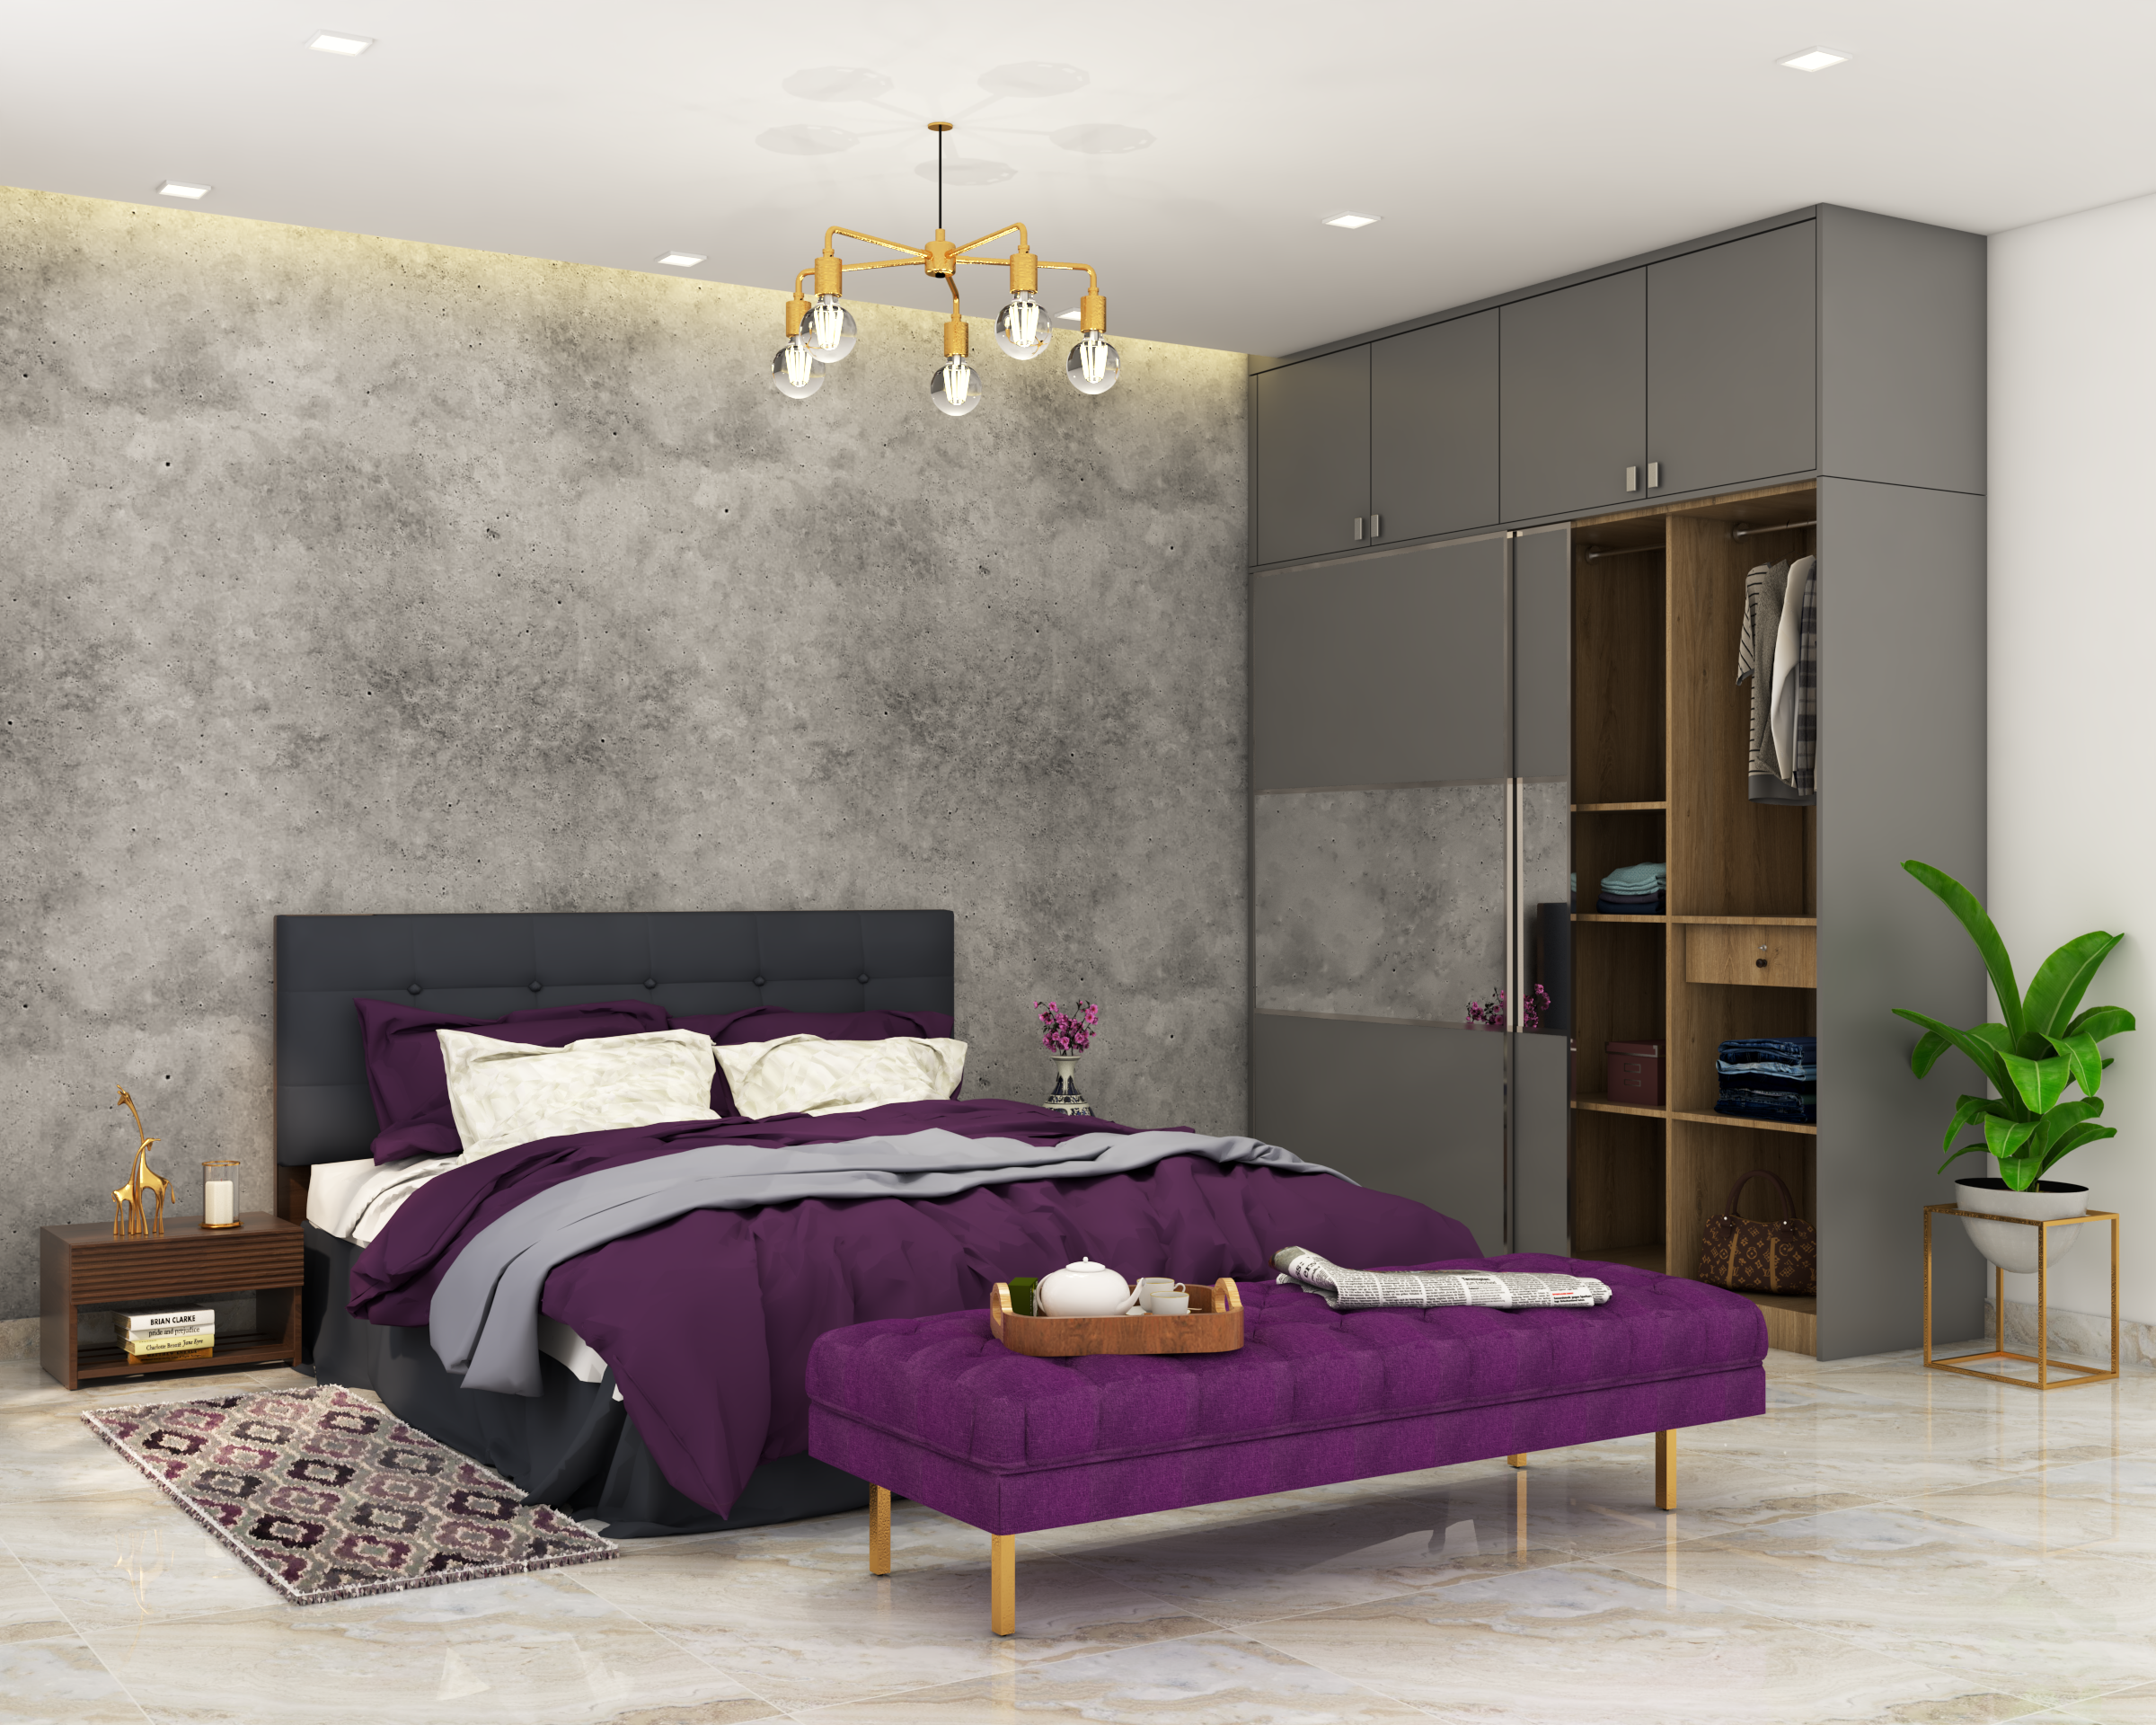 Contemporary Bedroom Wallpaper With A Textured Finish